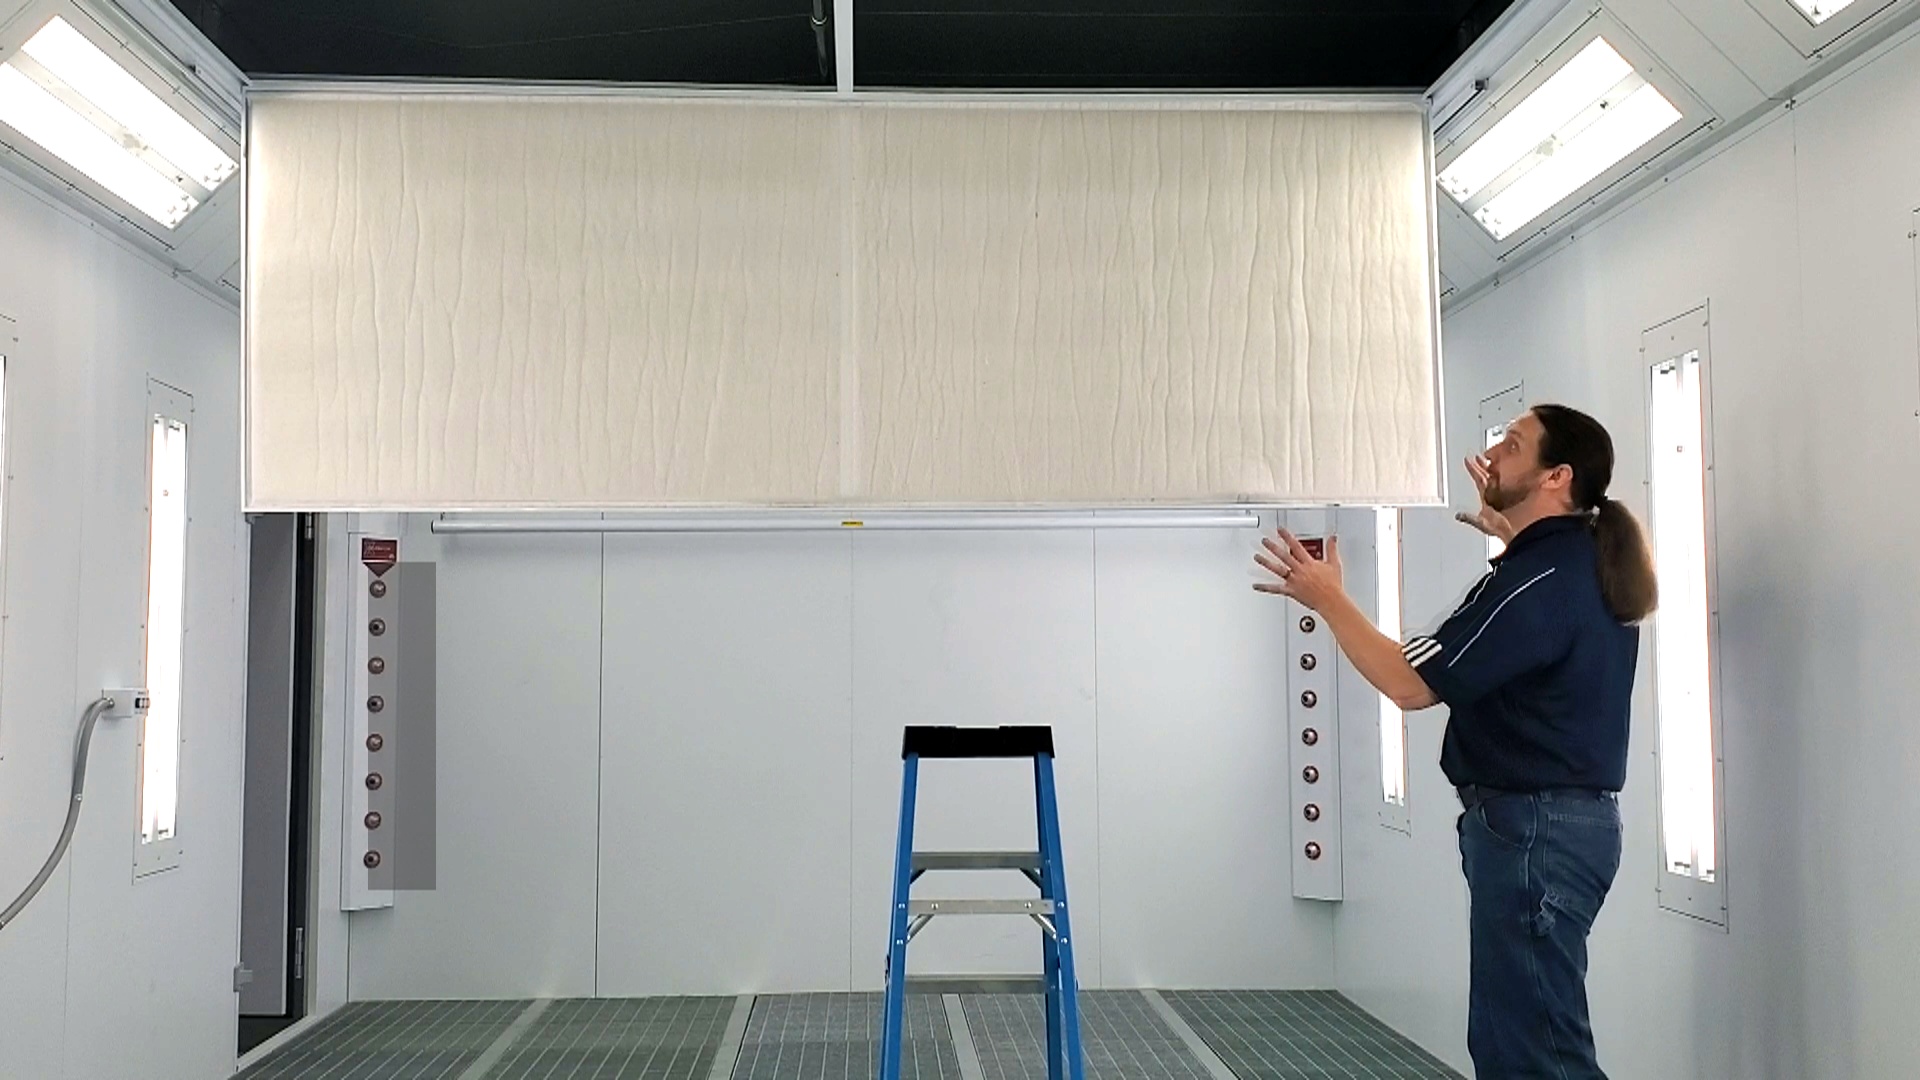 Find The Paint Booth Filter That's Right For You